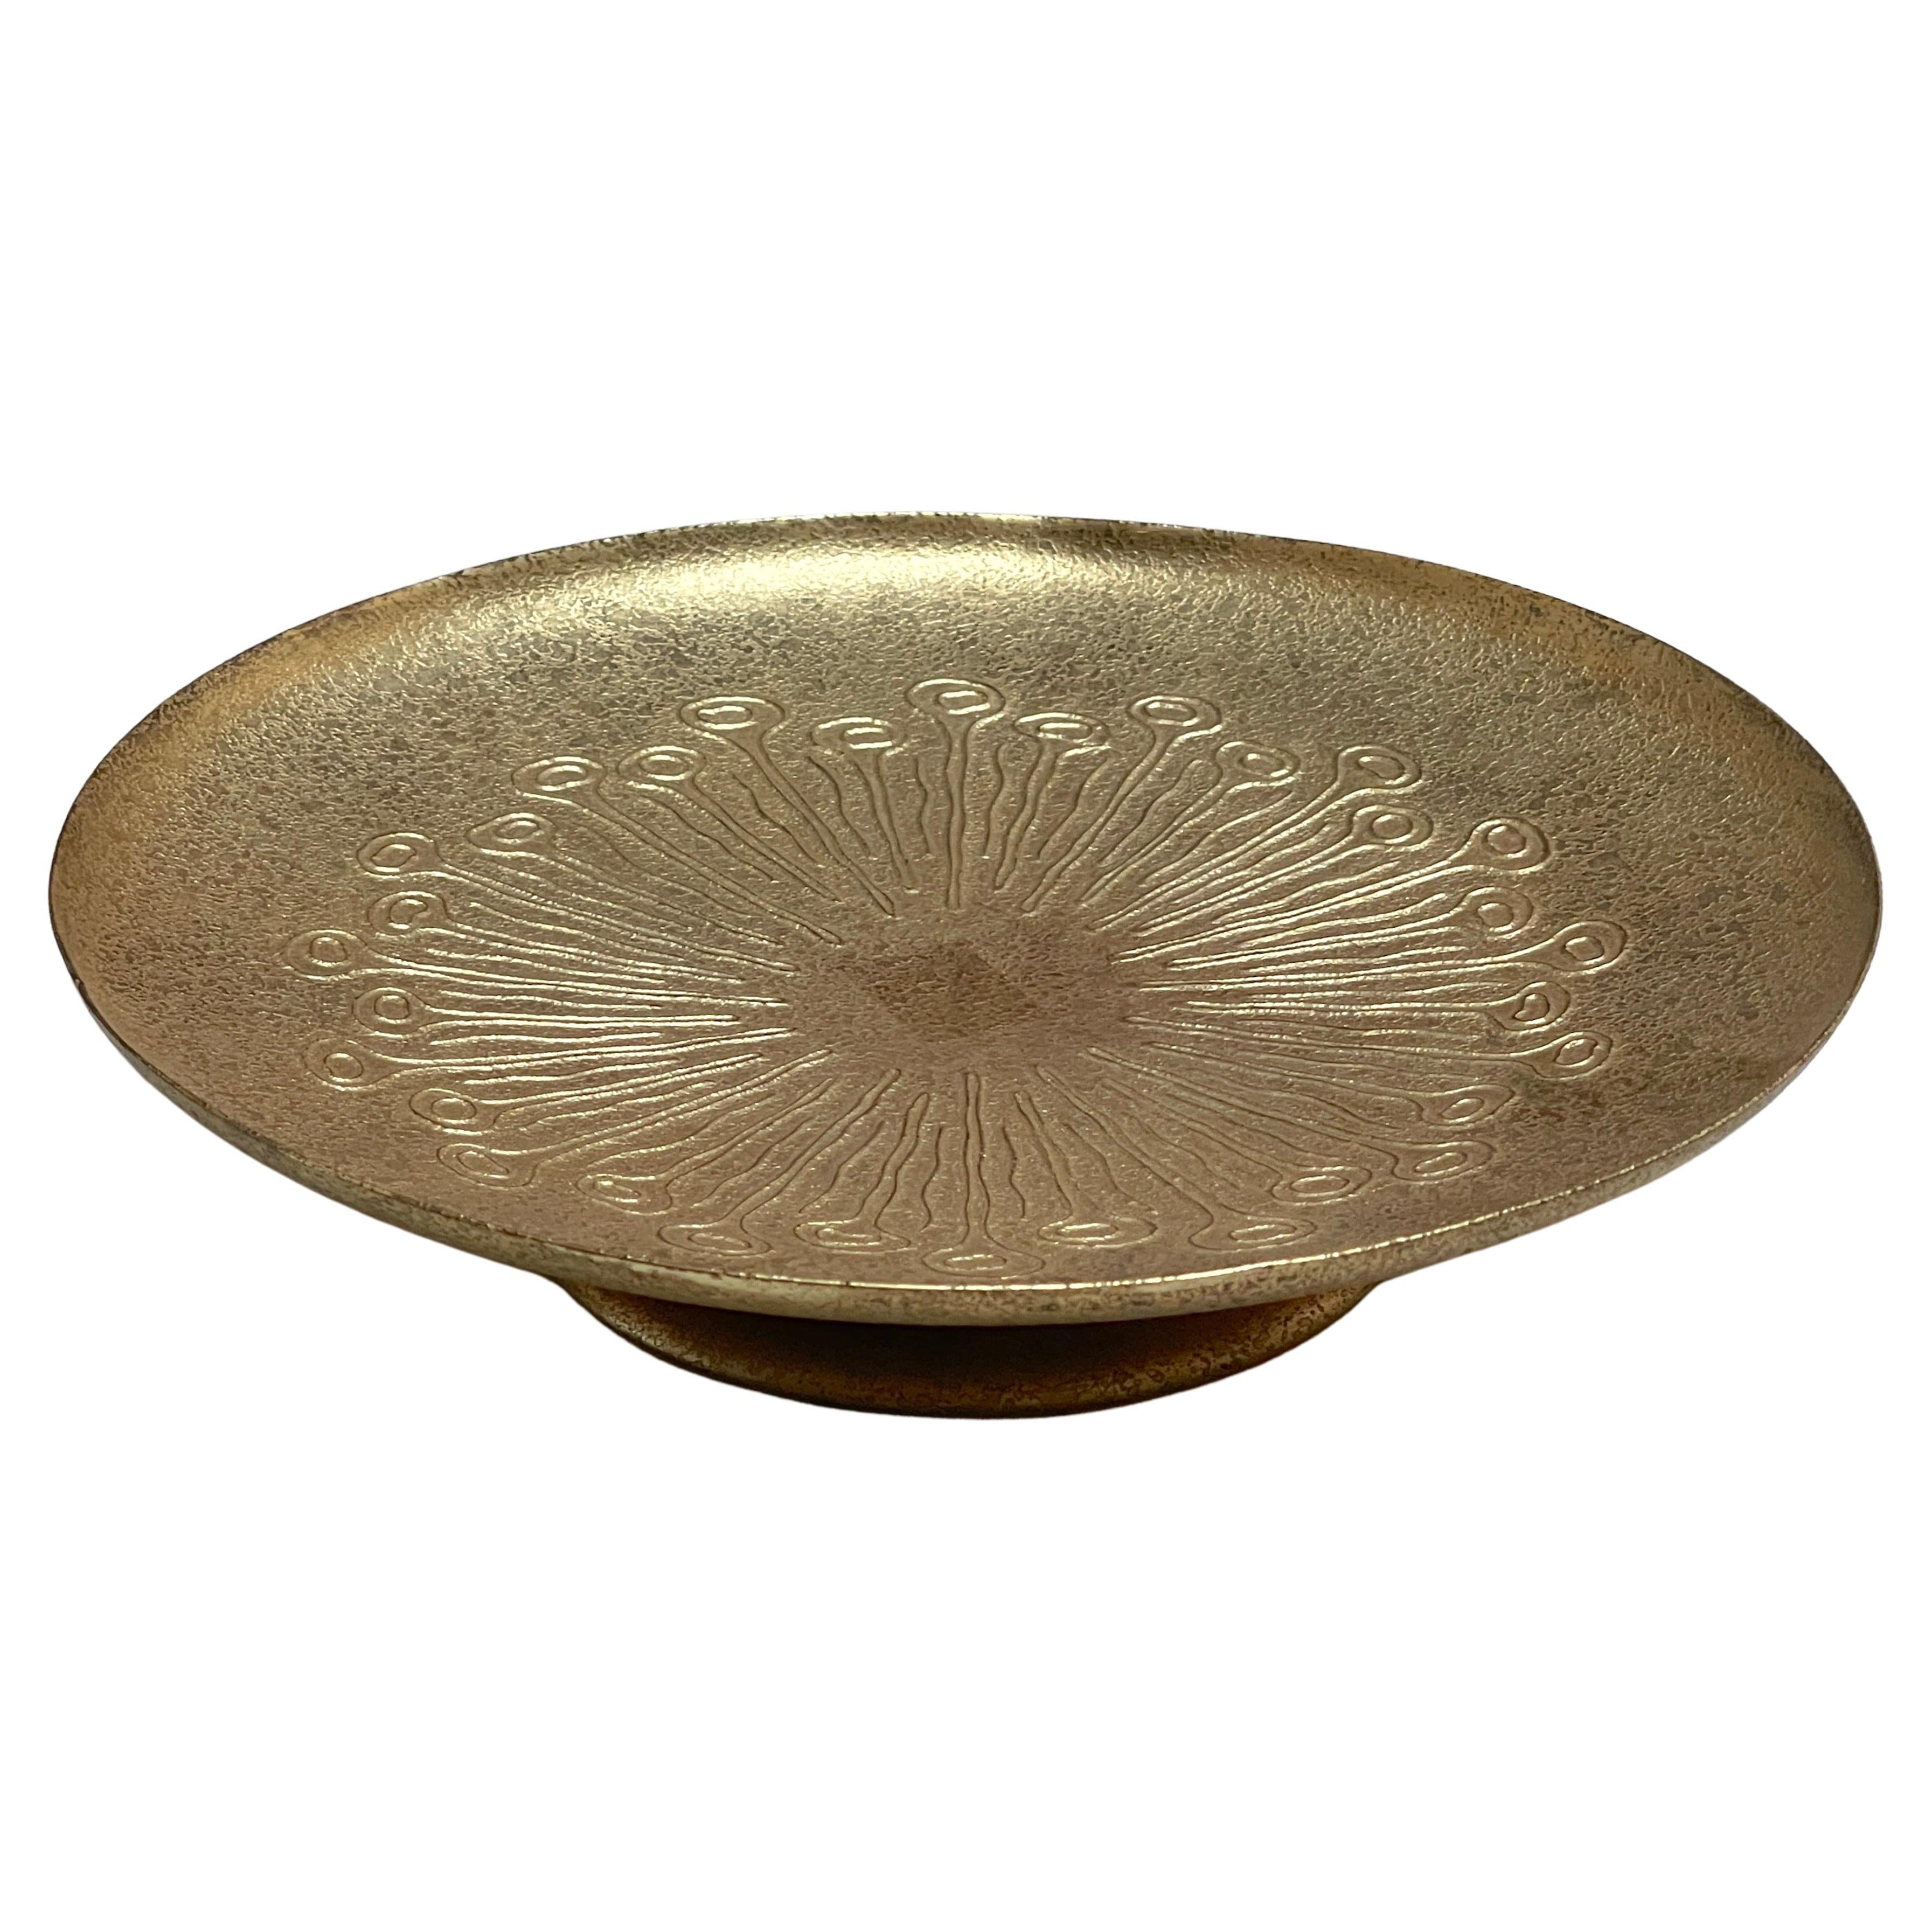 Tiffany Studios 'Sea Anemone ' Gilt Bronze Compote /Tazza New York #1732
USA, circa 1910

A truly unique work by Tiffany Studios, NY, shape # 1732
The circular gilt bronze raised dish is decorated with a center of raised bronze relief of what